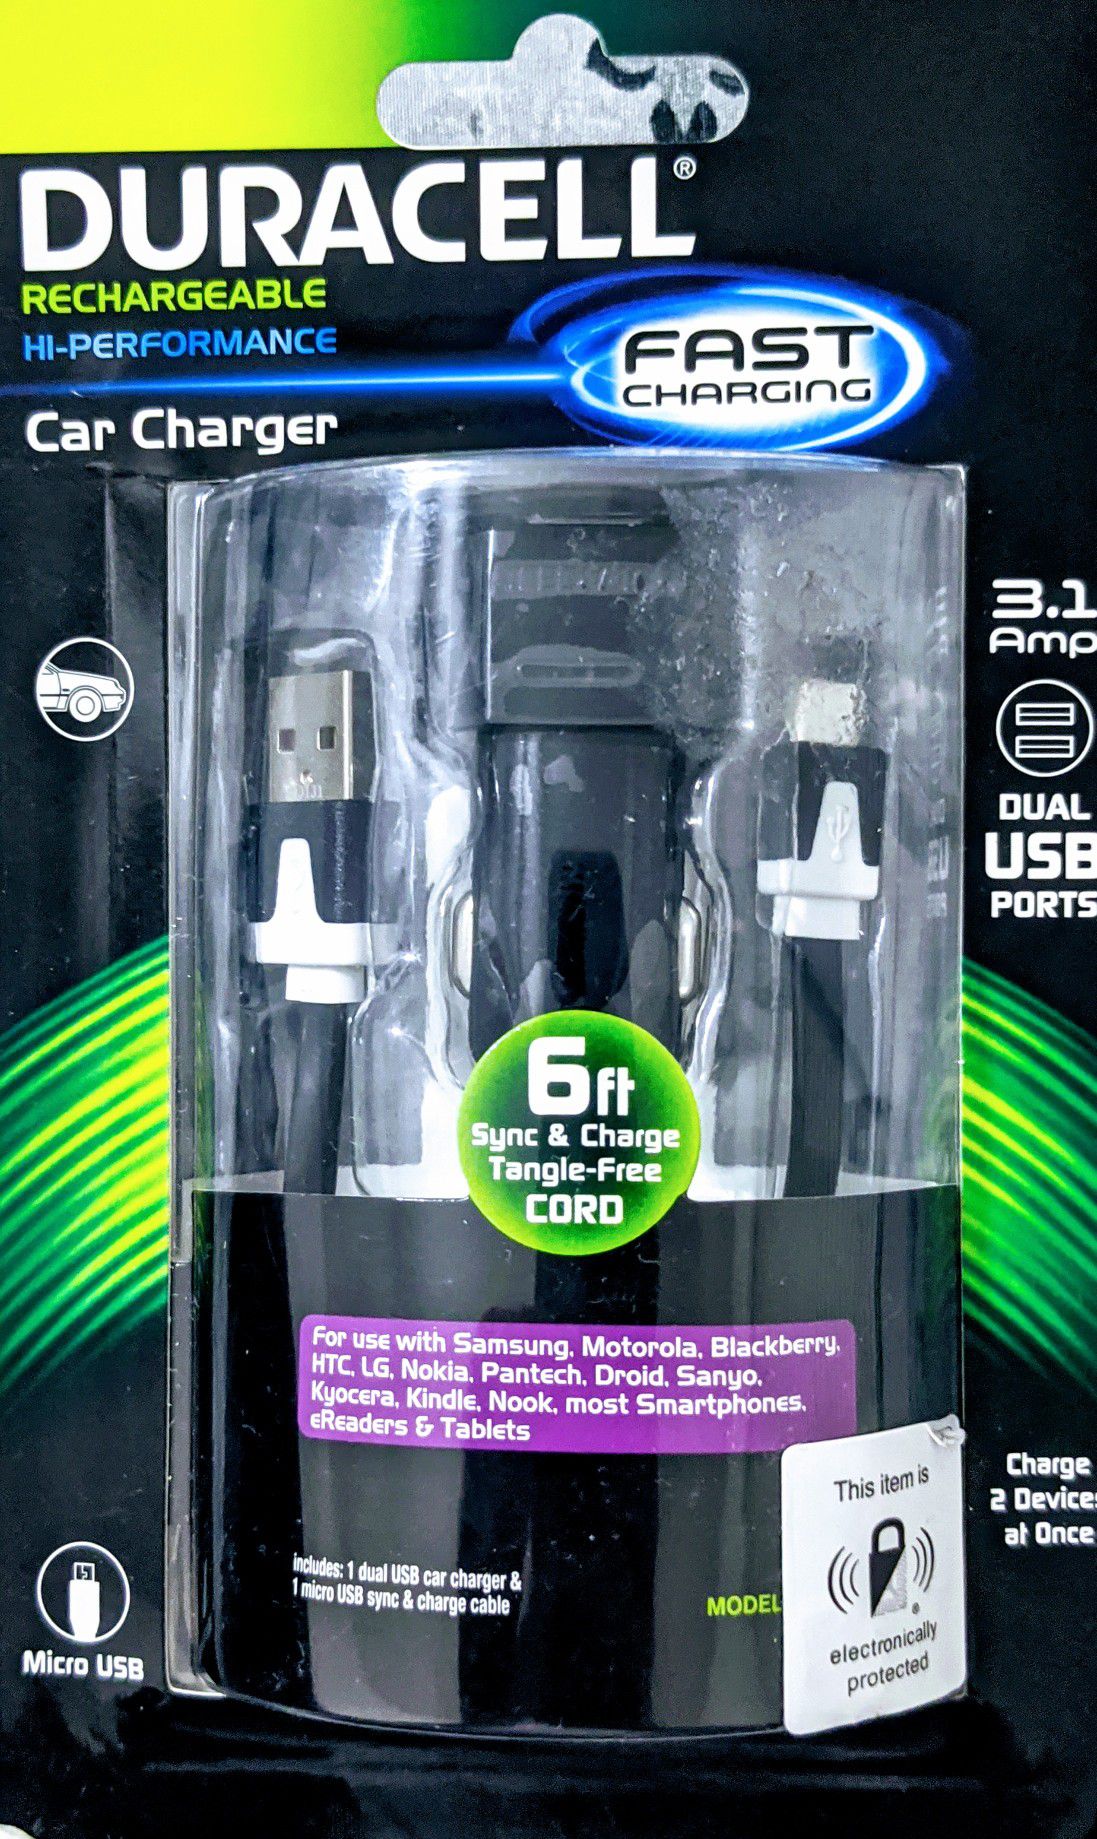 Duracell Rechargable car charger